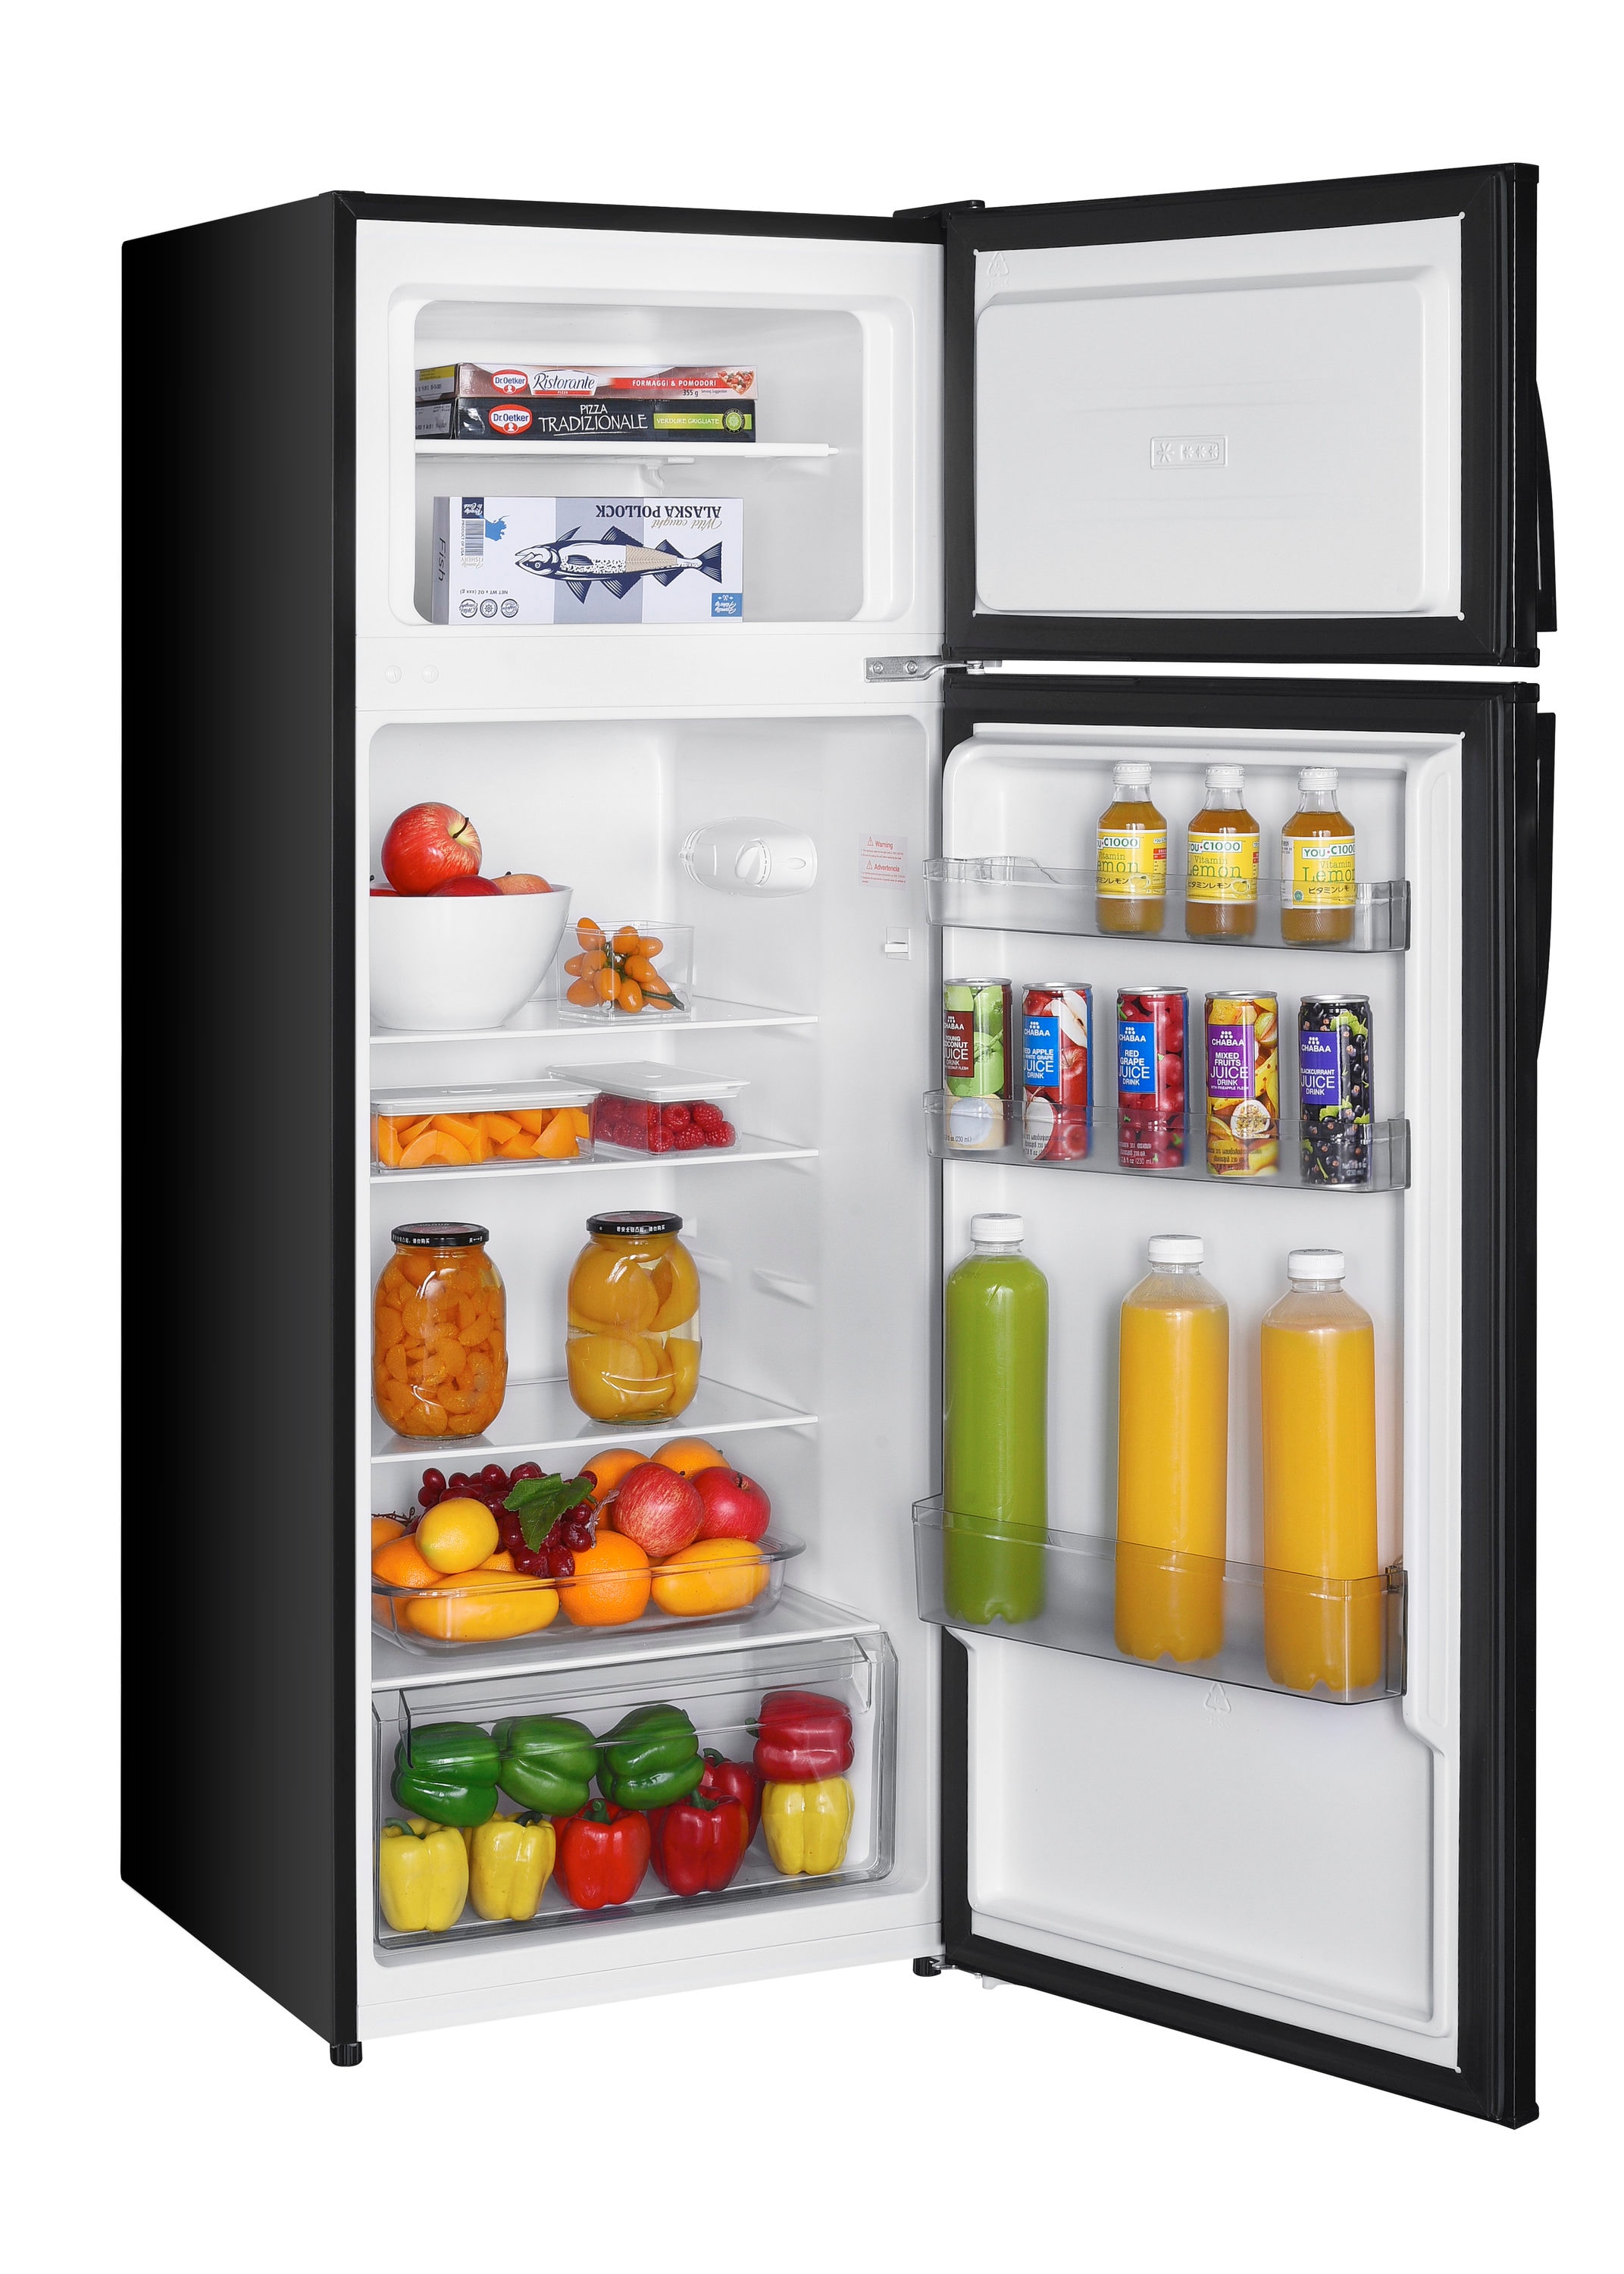 Premium Levella PRN7006HS 7.1 CuFt Frost Free Top-Mount Refrigerator with  Slide-Out Food Tray and Electronic Temperature Controls in Inox